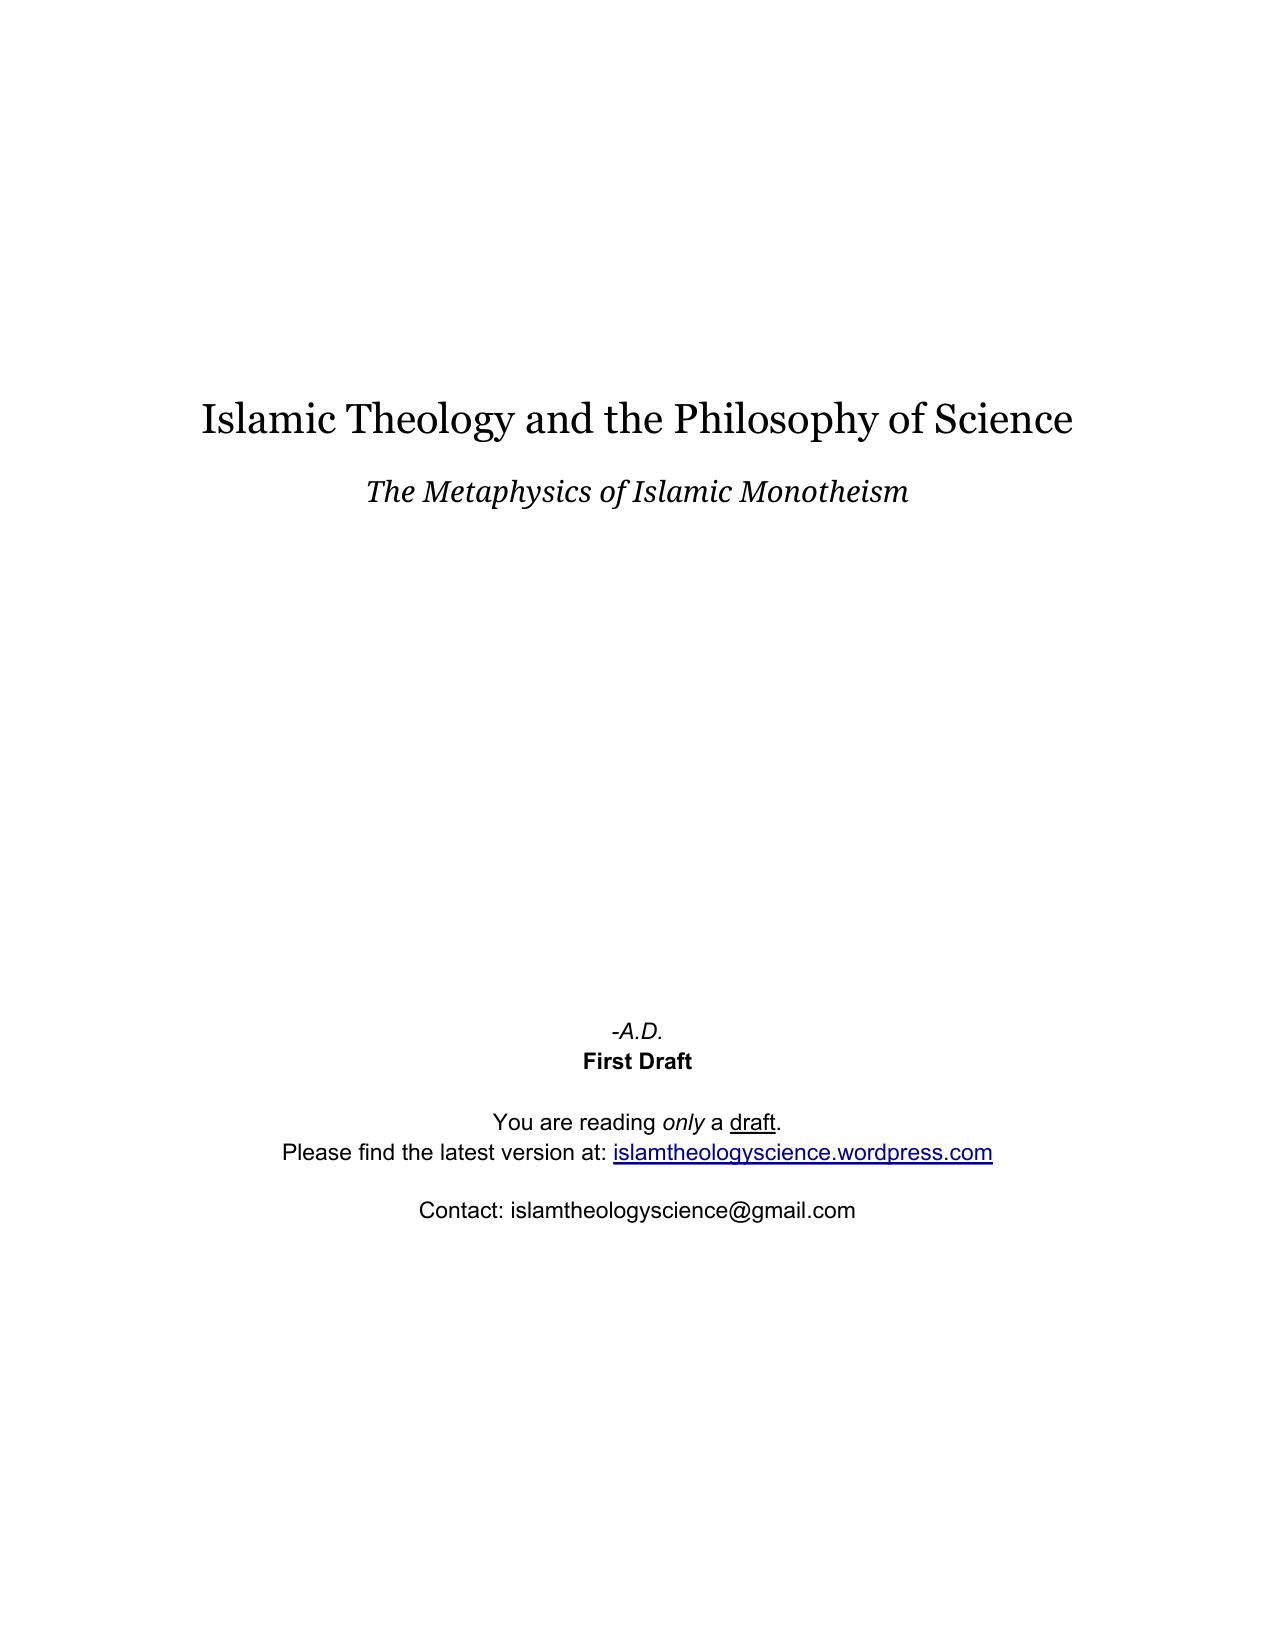 Islamic Theology and the Philosophy of Science 2012